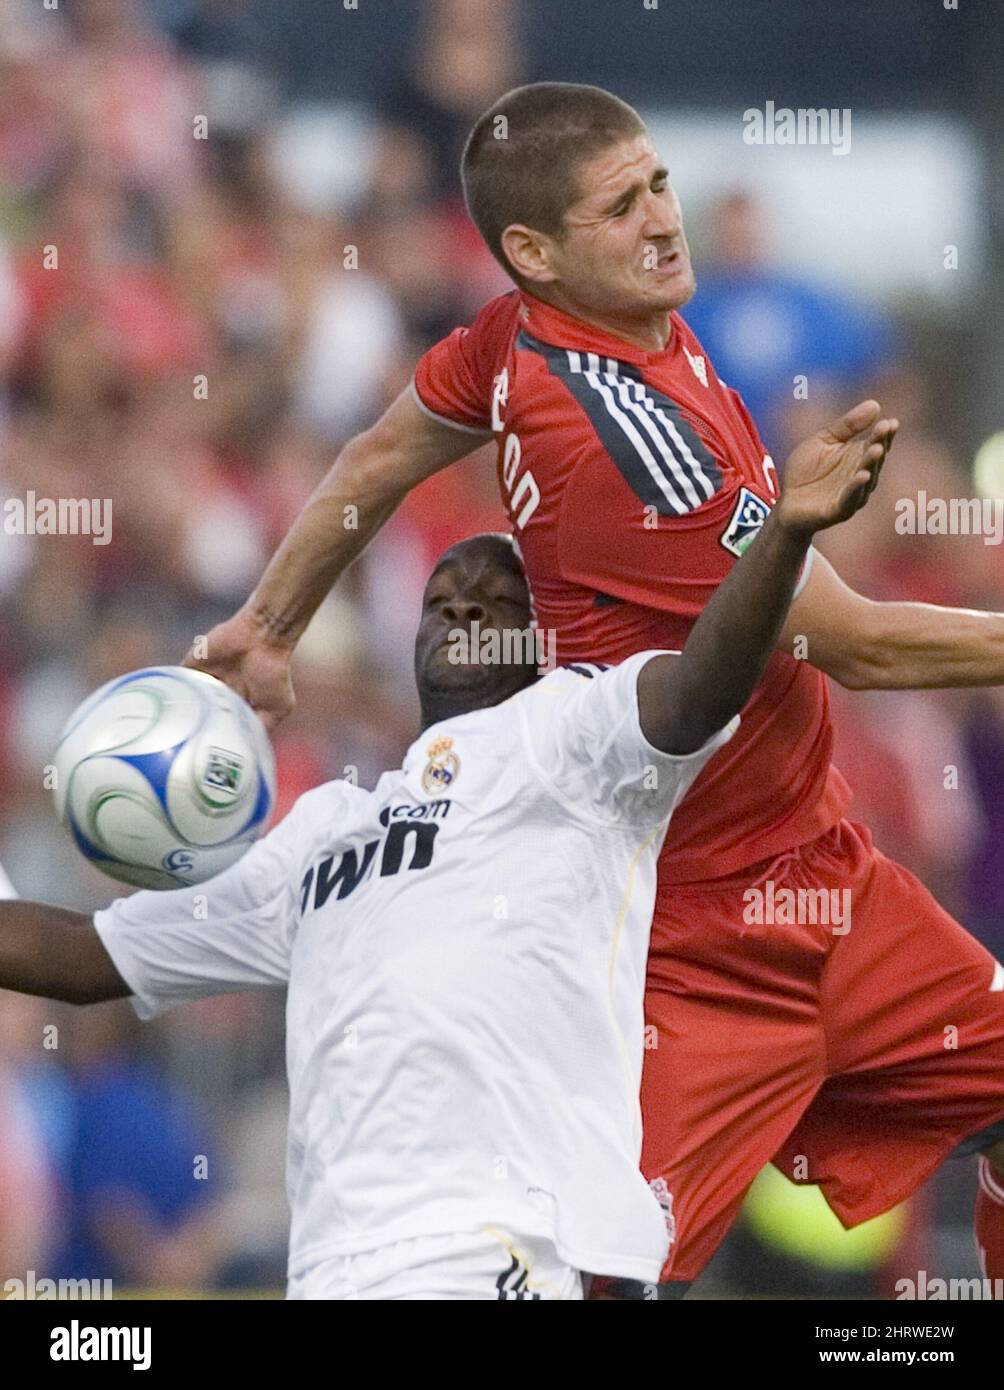 ** CORRECTS DATE TO FRIDAY, AUG. 7, 2009 ** Real Madrid's Lassana Diarra, left, challenges Toronto F.C's Carl Robinson during first half of the friendly soccer game in Toronto on Friday, Aug. 7, 2009. (AP Photo/The Canadian Press,Chris Young) Stock Photo